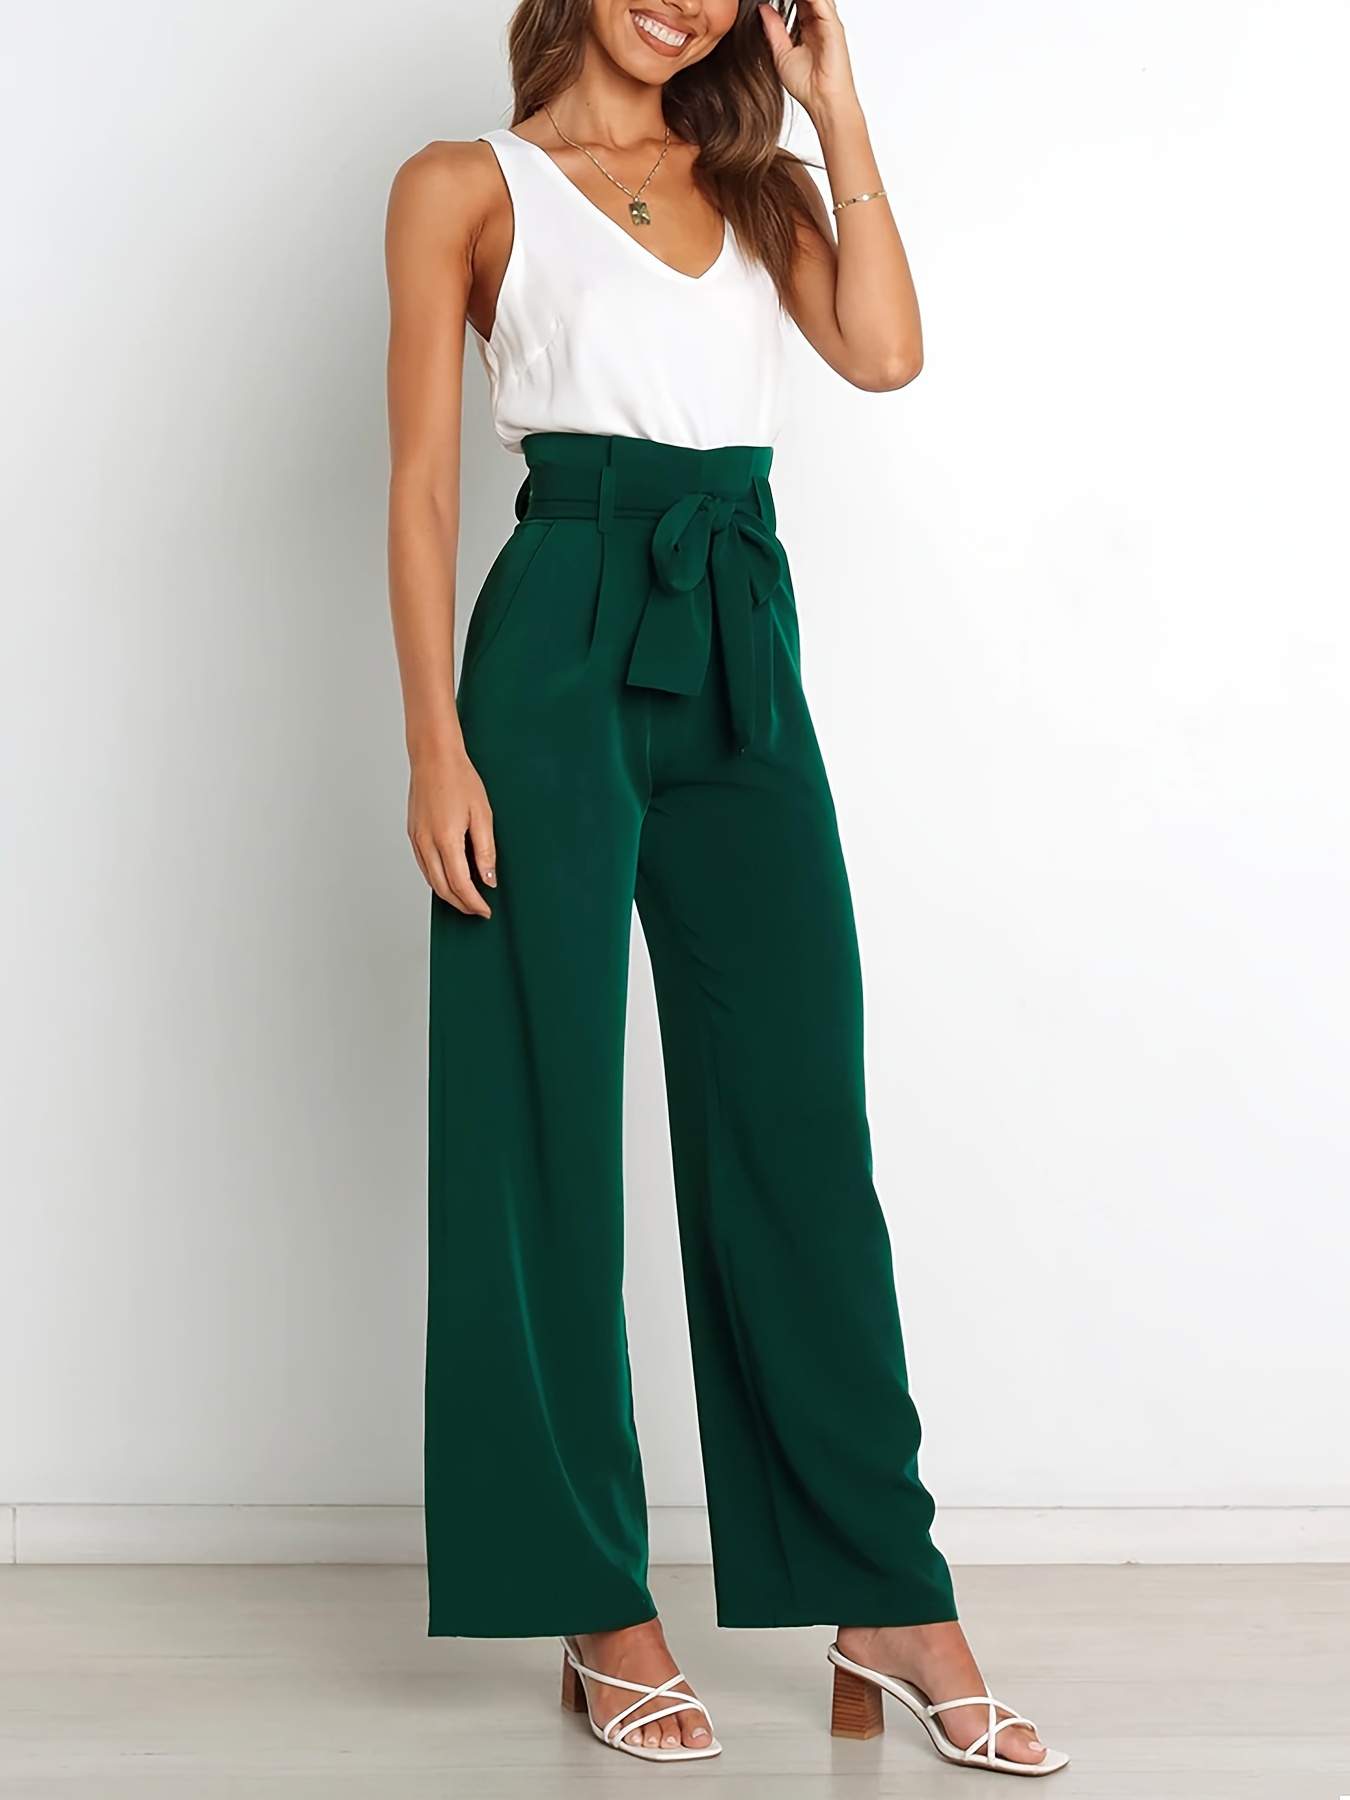 Woman's Casual Full-Length Loose Pants 2022 spring new high waist thin  loose straight wide leg trousers fashion women's clothing